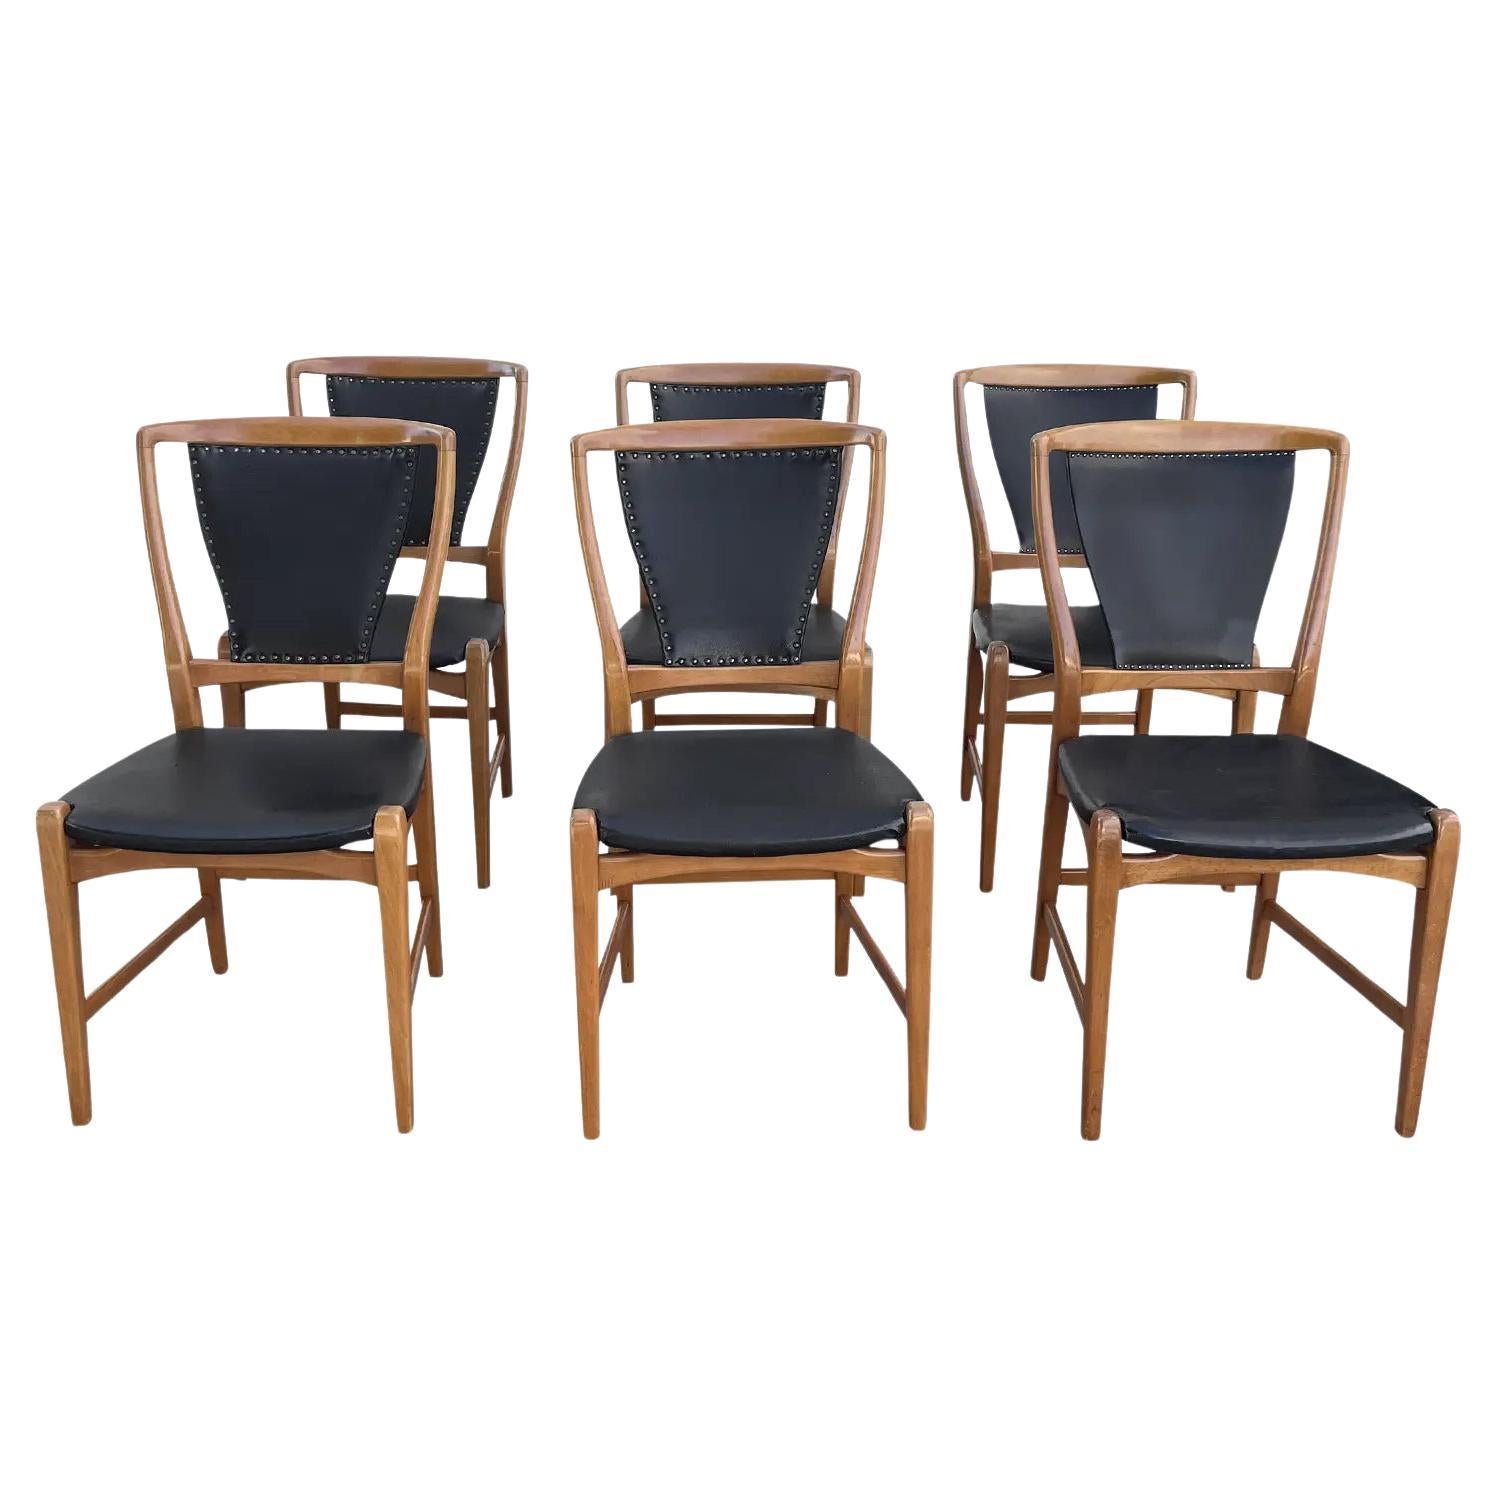 Pearwood Dining Room Chairs